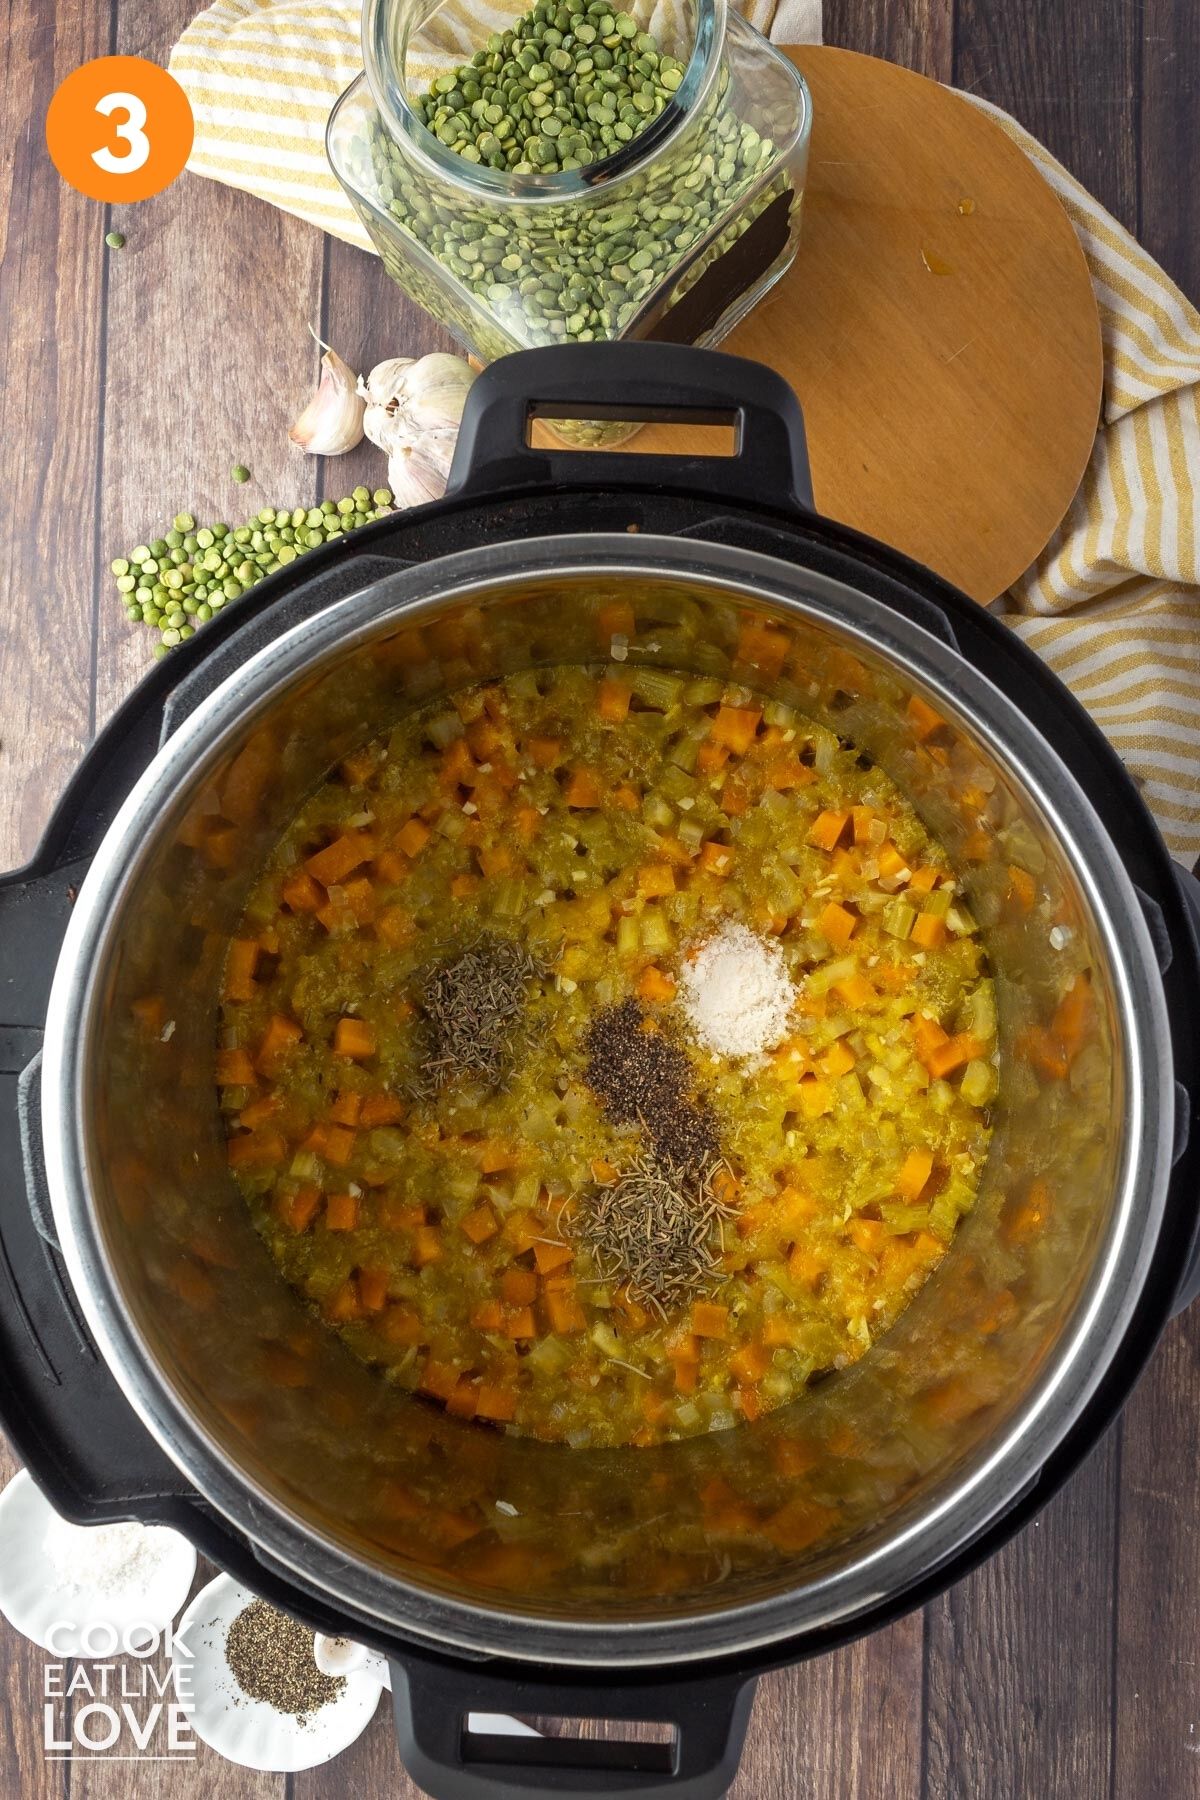 Seasonings added to the veggie, peas, and pumpkin mixture in the instant pot.